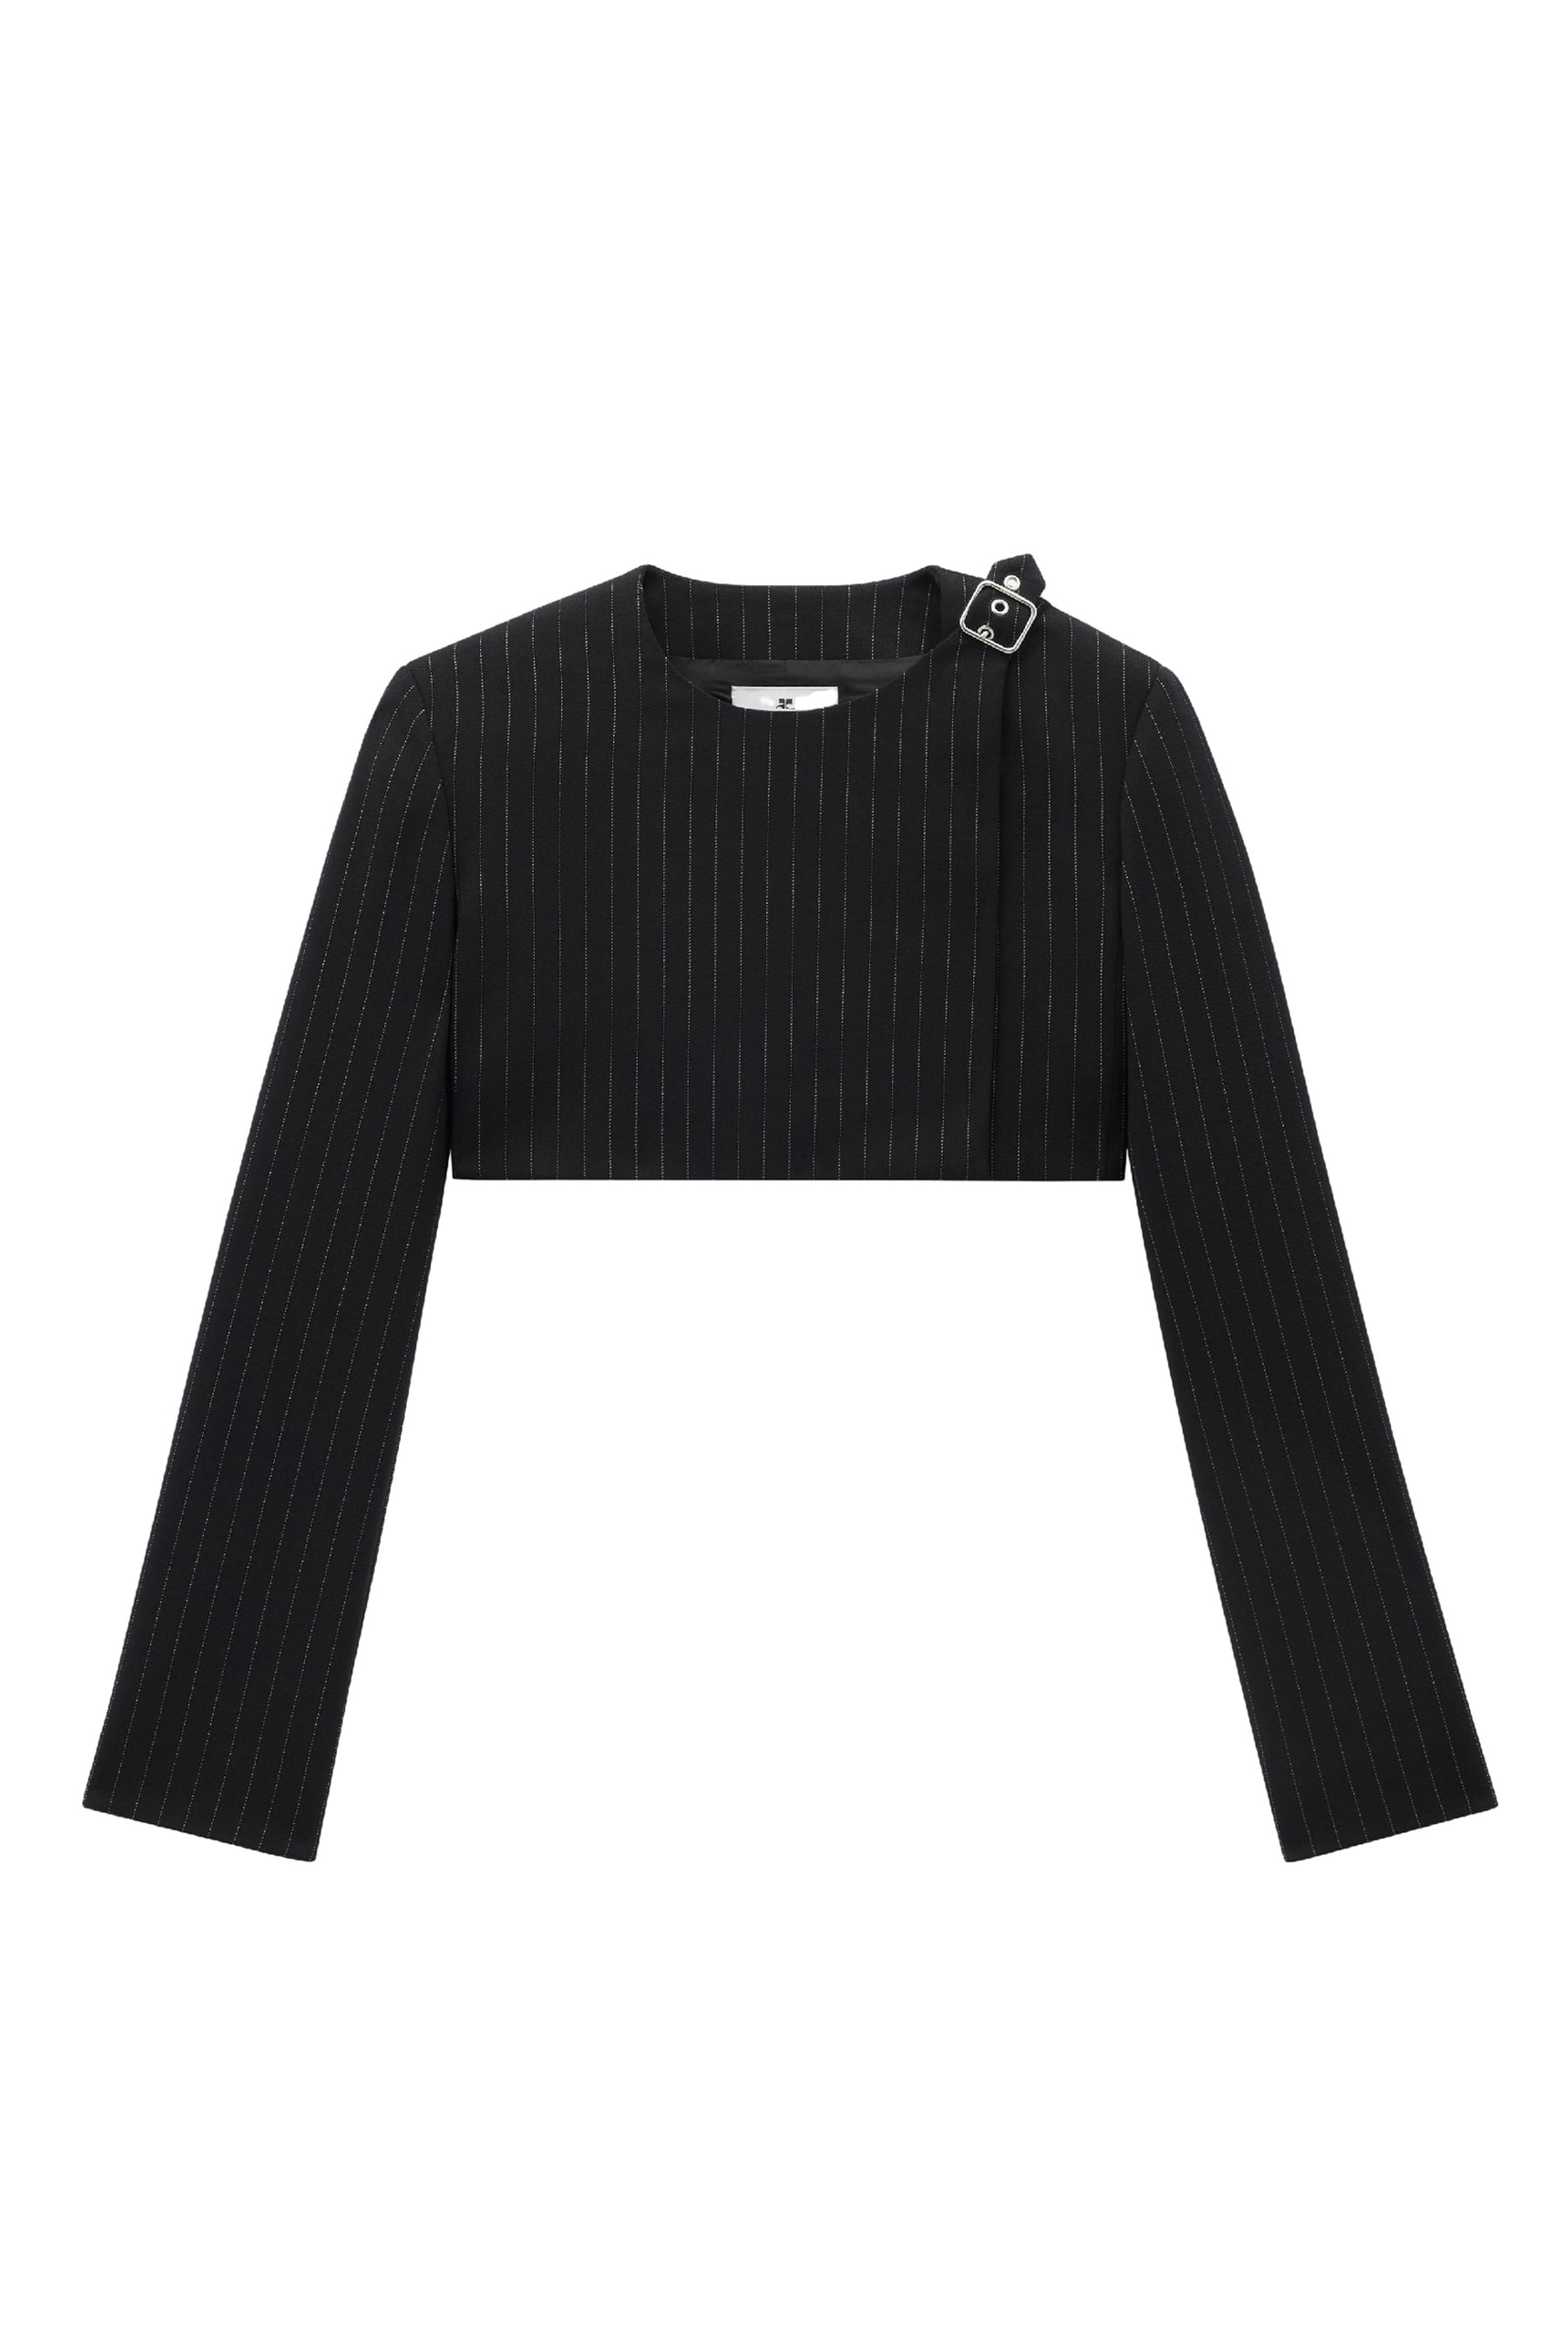 BUCKLE TAILORED PINSTRIPE TOP / BLK/WHT